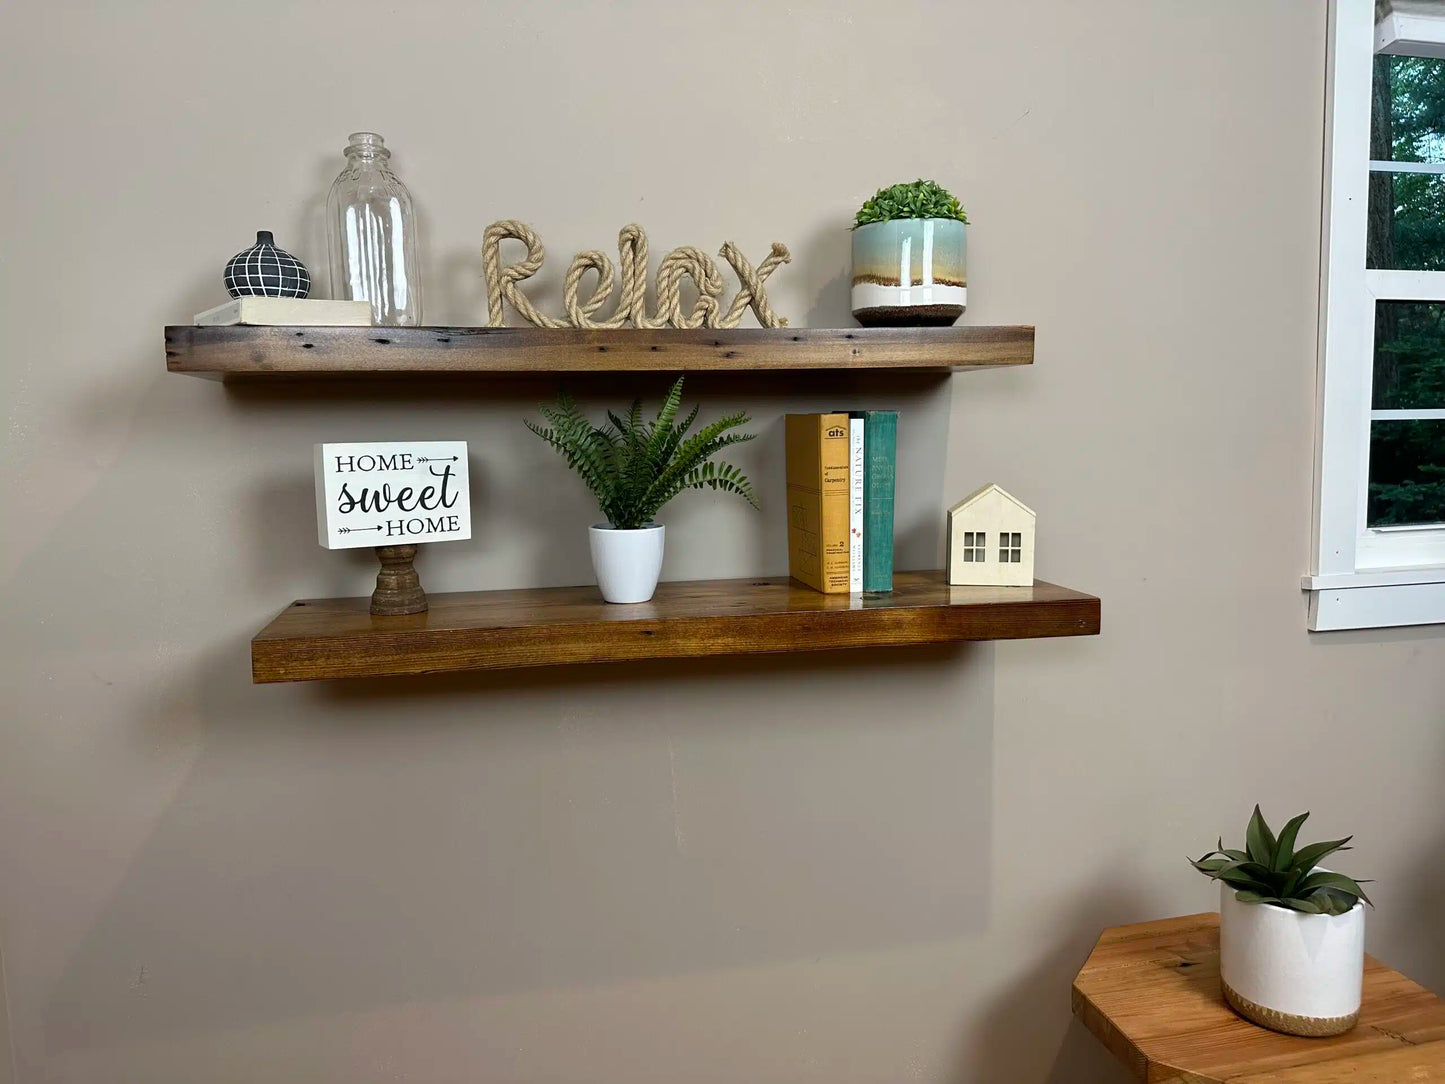 two reclaimed wood floating wall shelves in the contemporary collection and early american finish. Shelves have a shine on them from a lacquer application and show variance in wood color as well as nail holes in the wood.